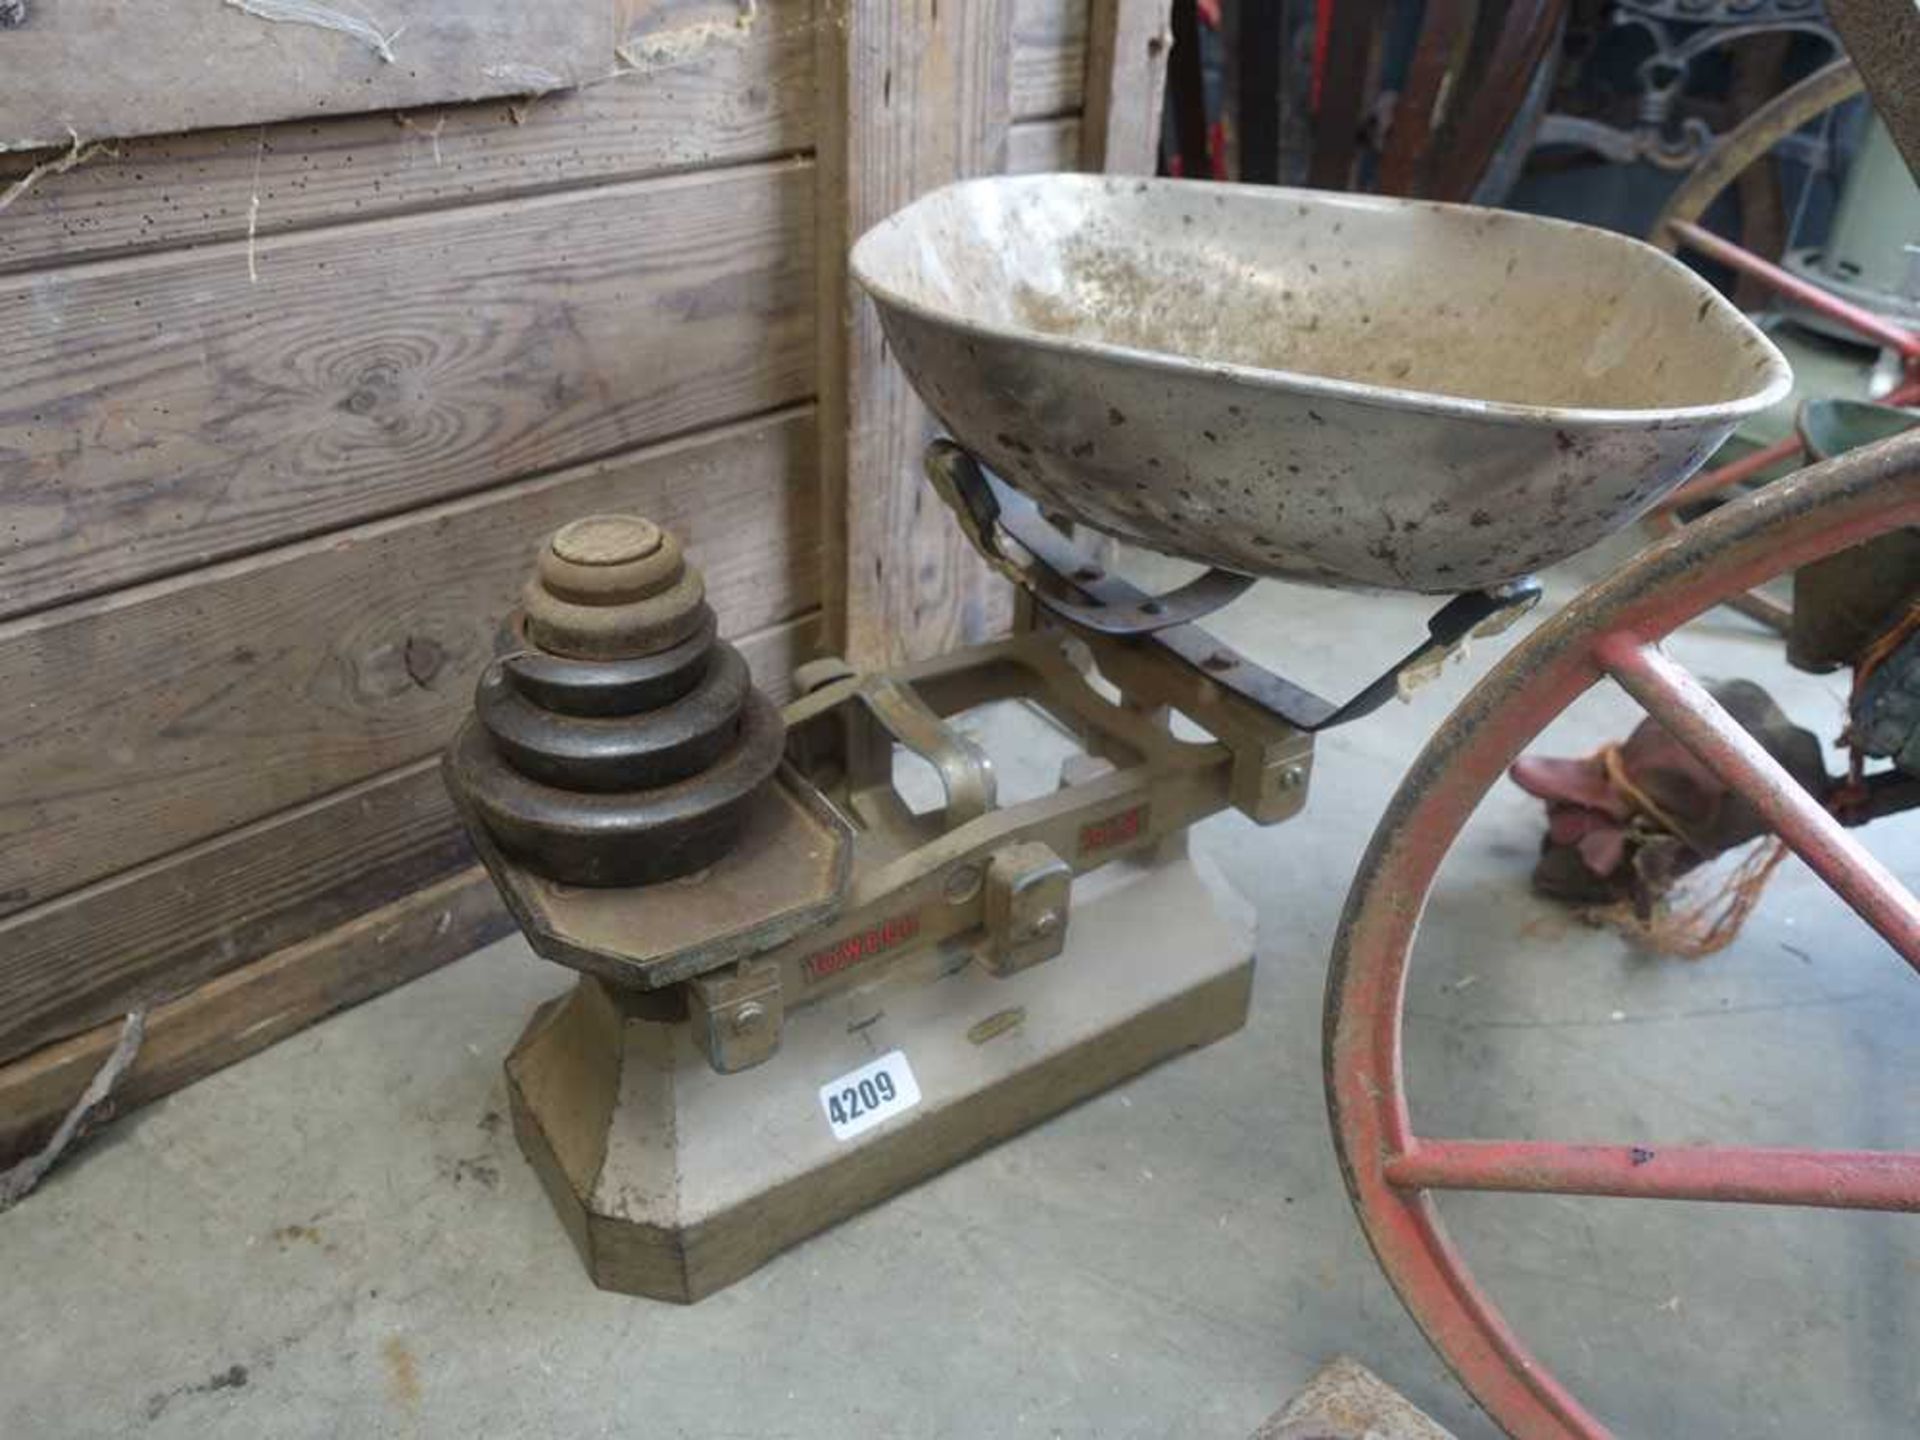 Set of vintage weighing scales with set of weights